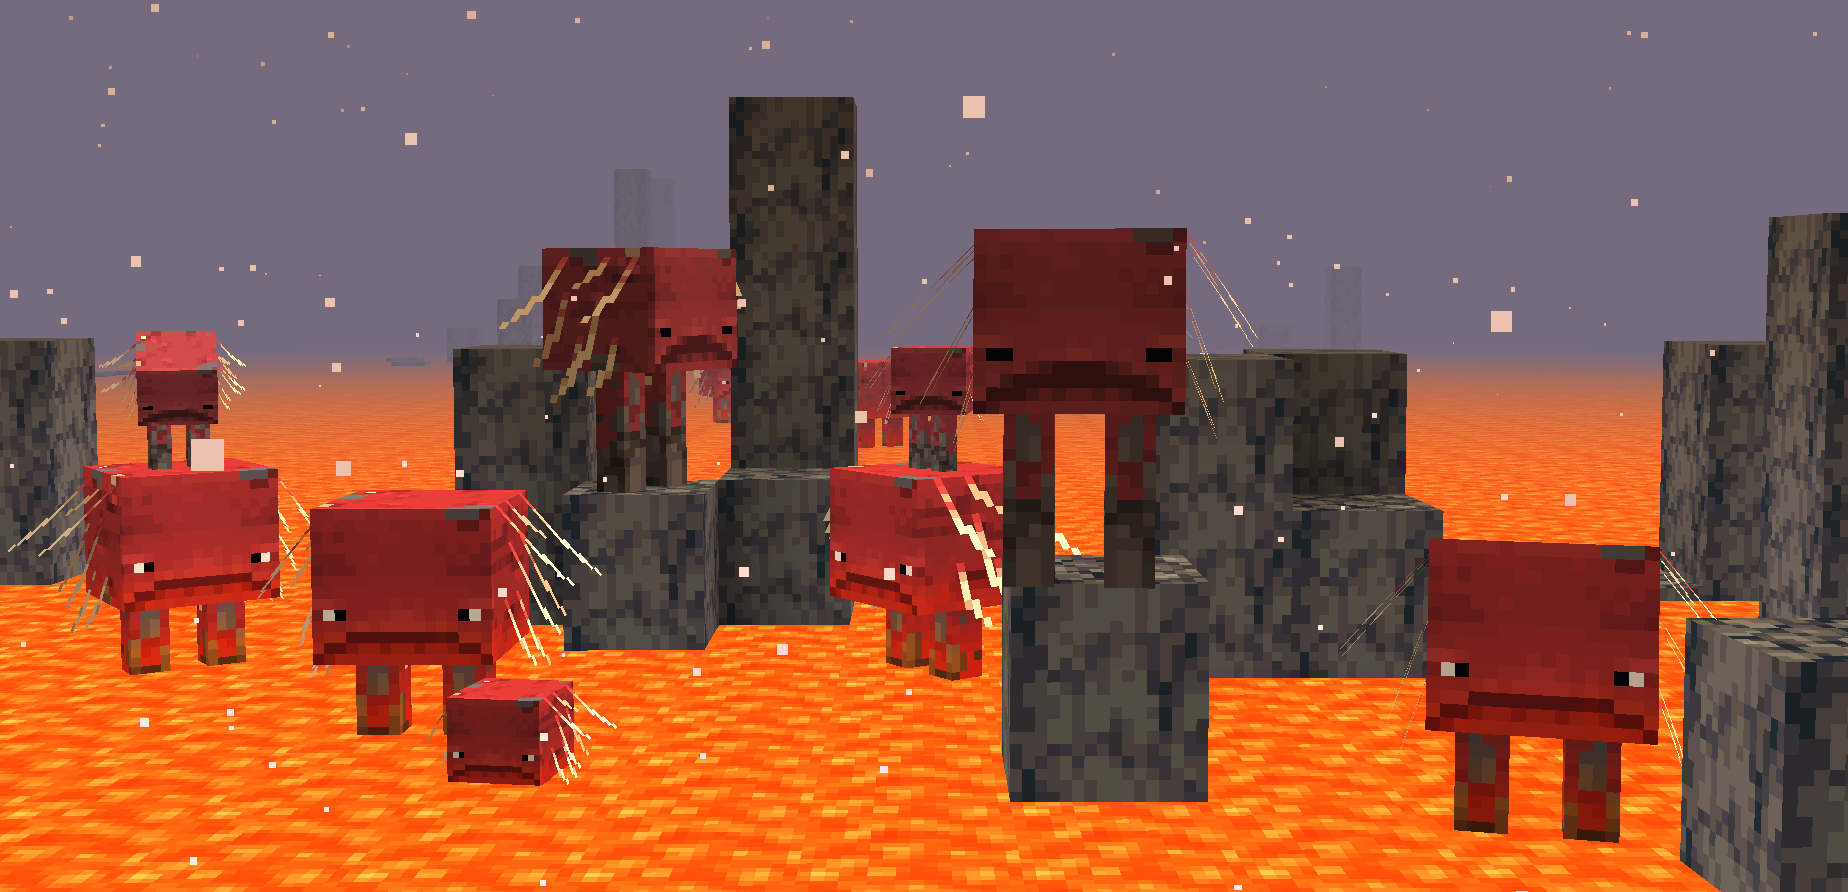 A pack of striders in a lava ocean, with Lazy Striders textures.